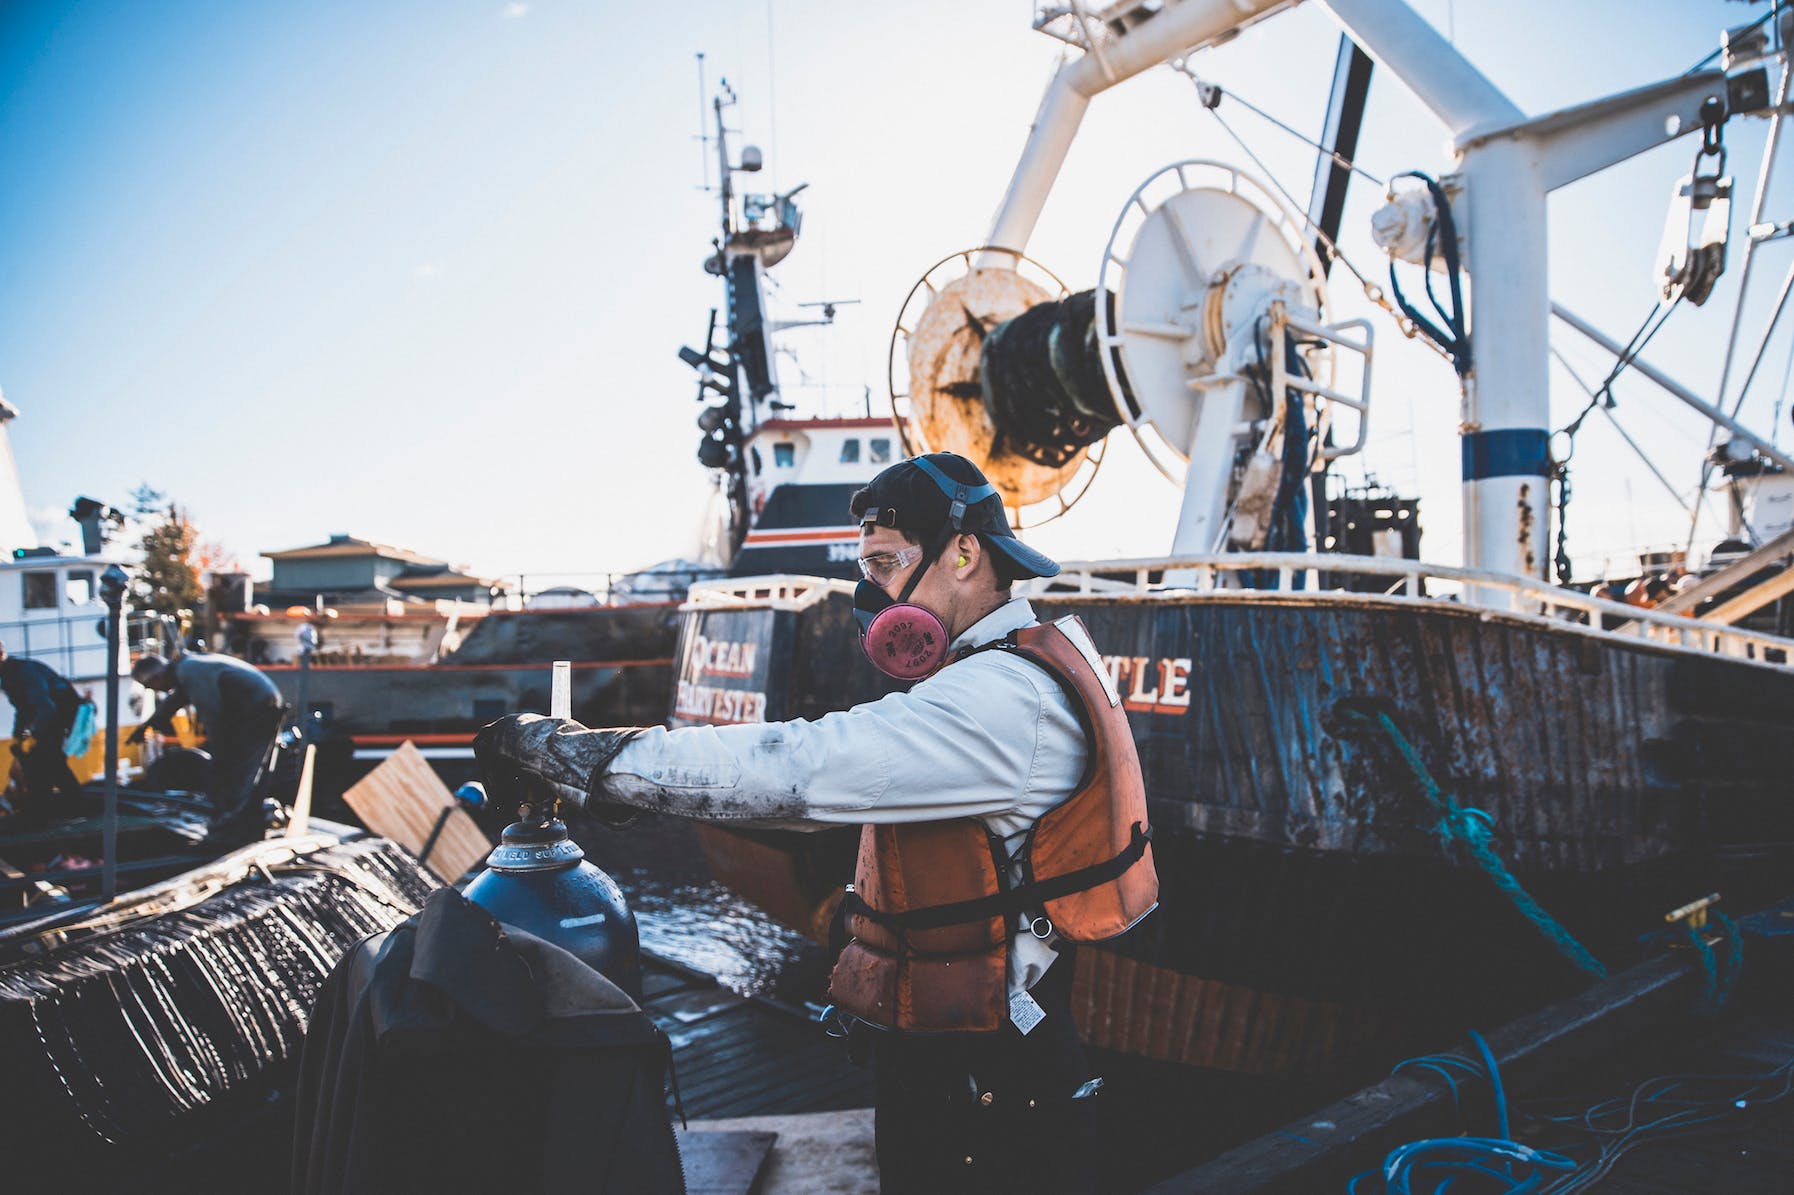 Caucasian man wearing a respirator and protective eyewear inspects a gas cylinder in the shipyard. Rugged fishing vessels with signs of rust docked in the background.